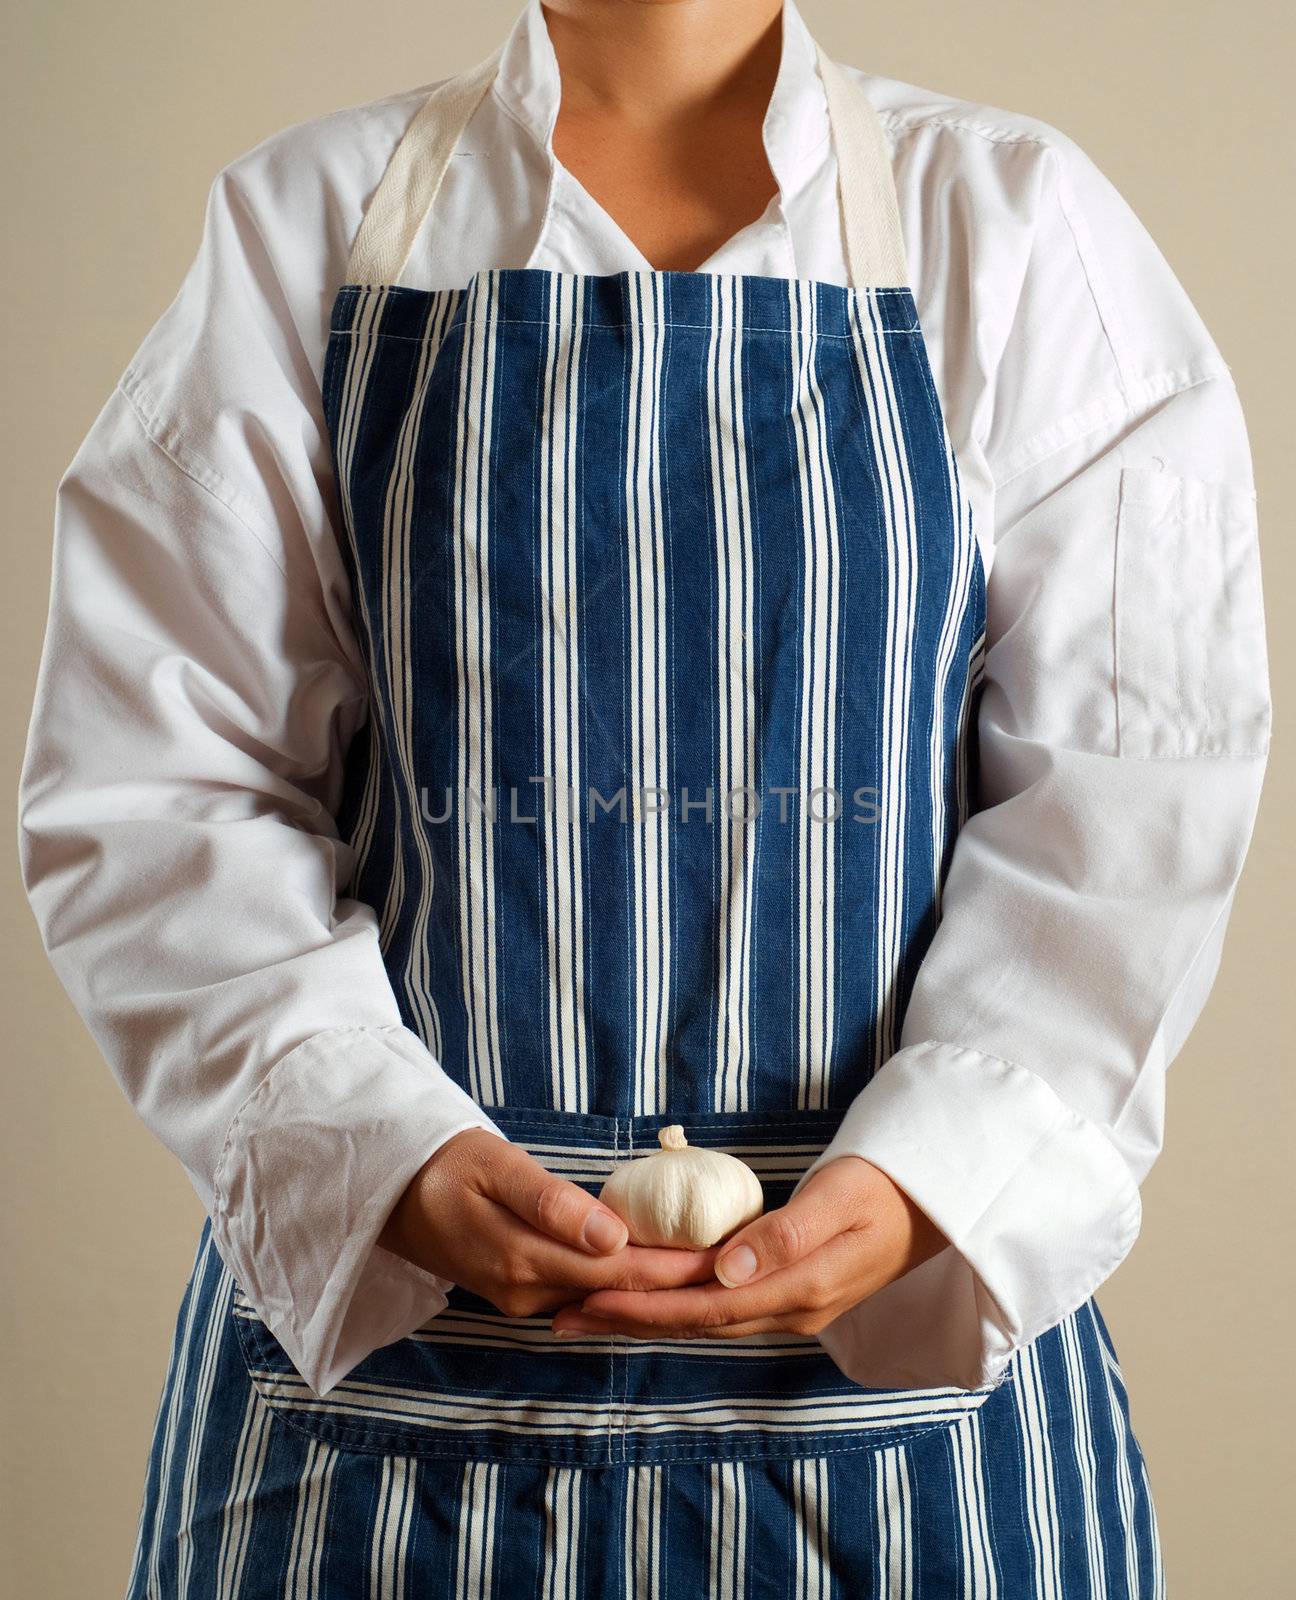 Woman chef or cook standing with garlic clove in hands